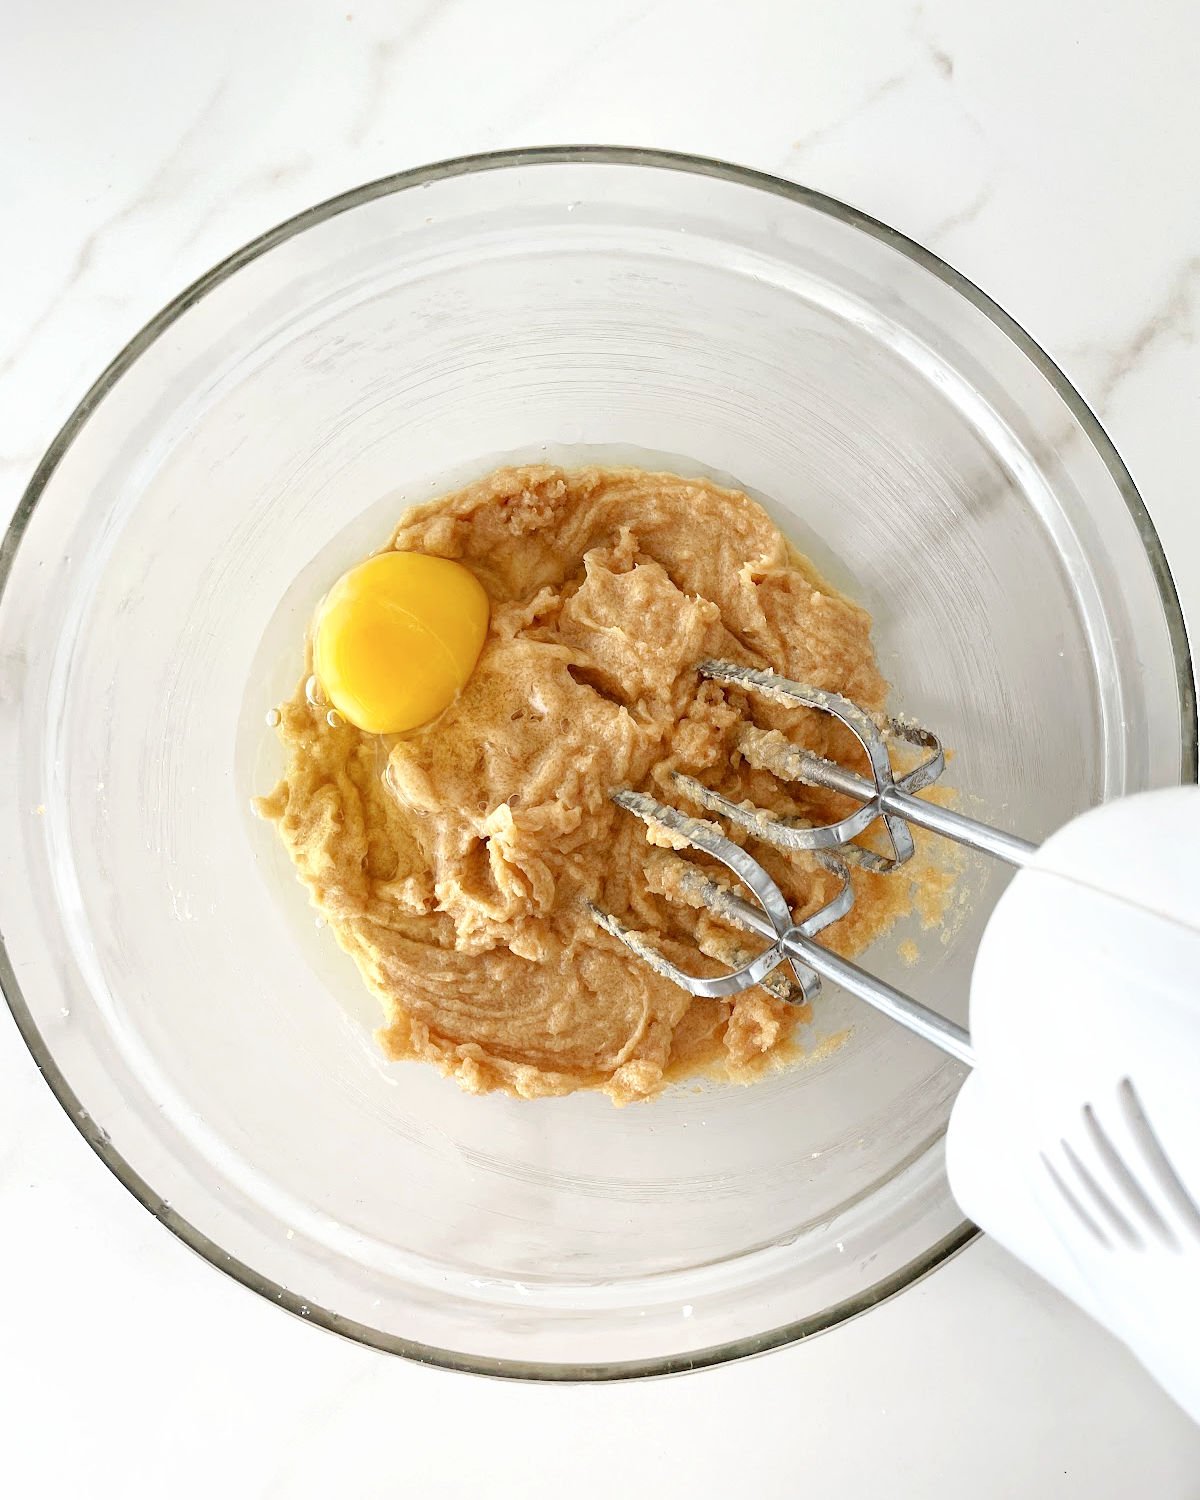 Egg added to sugar butter mixture in a glass bowl on a white surface with an electric mixer inside.